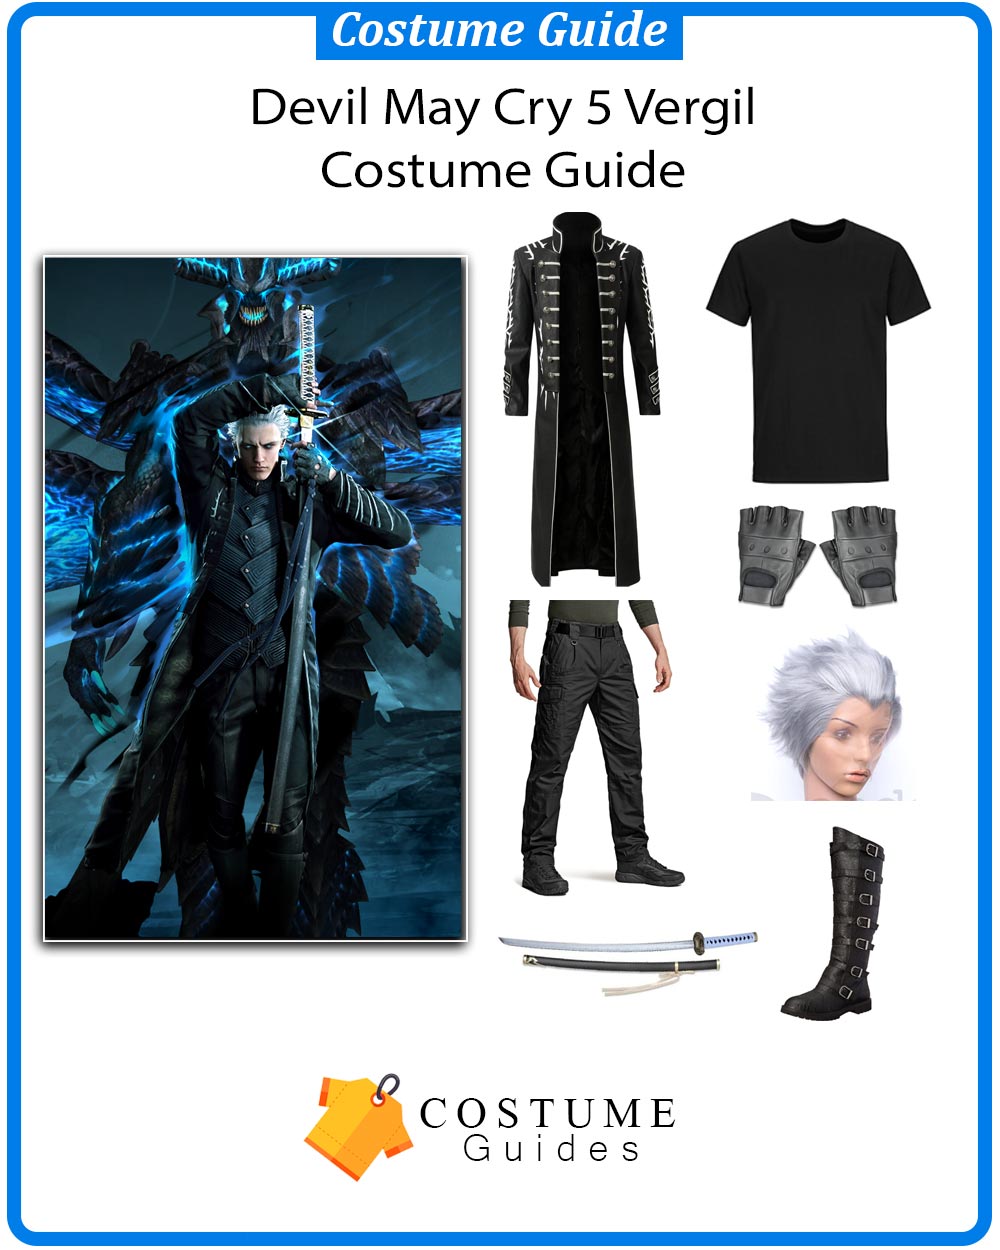 Devil May Cry 5 Vergil Costume Guide